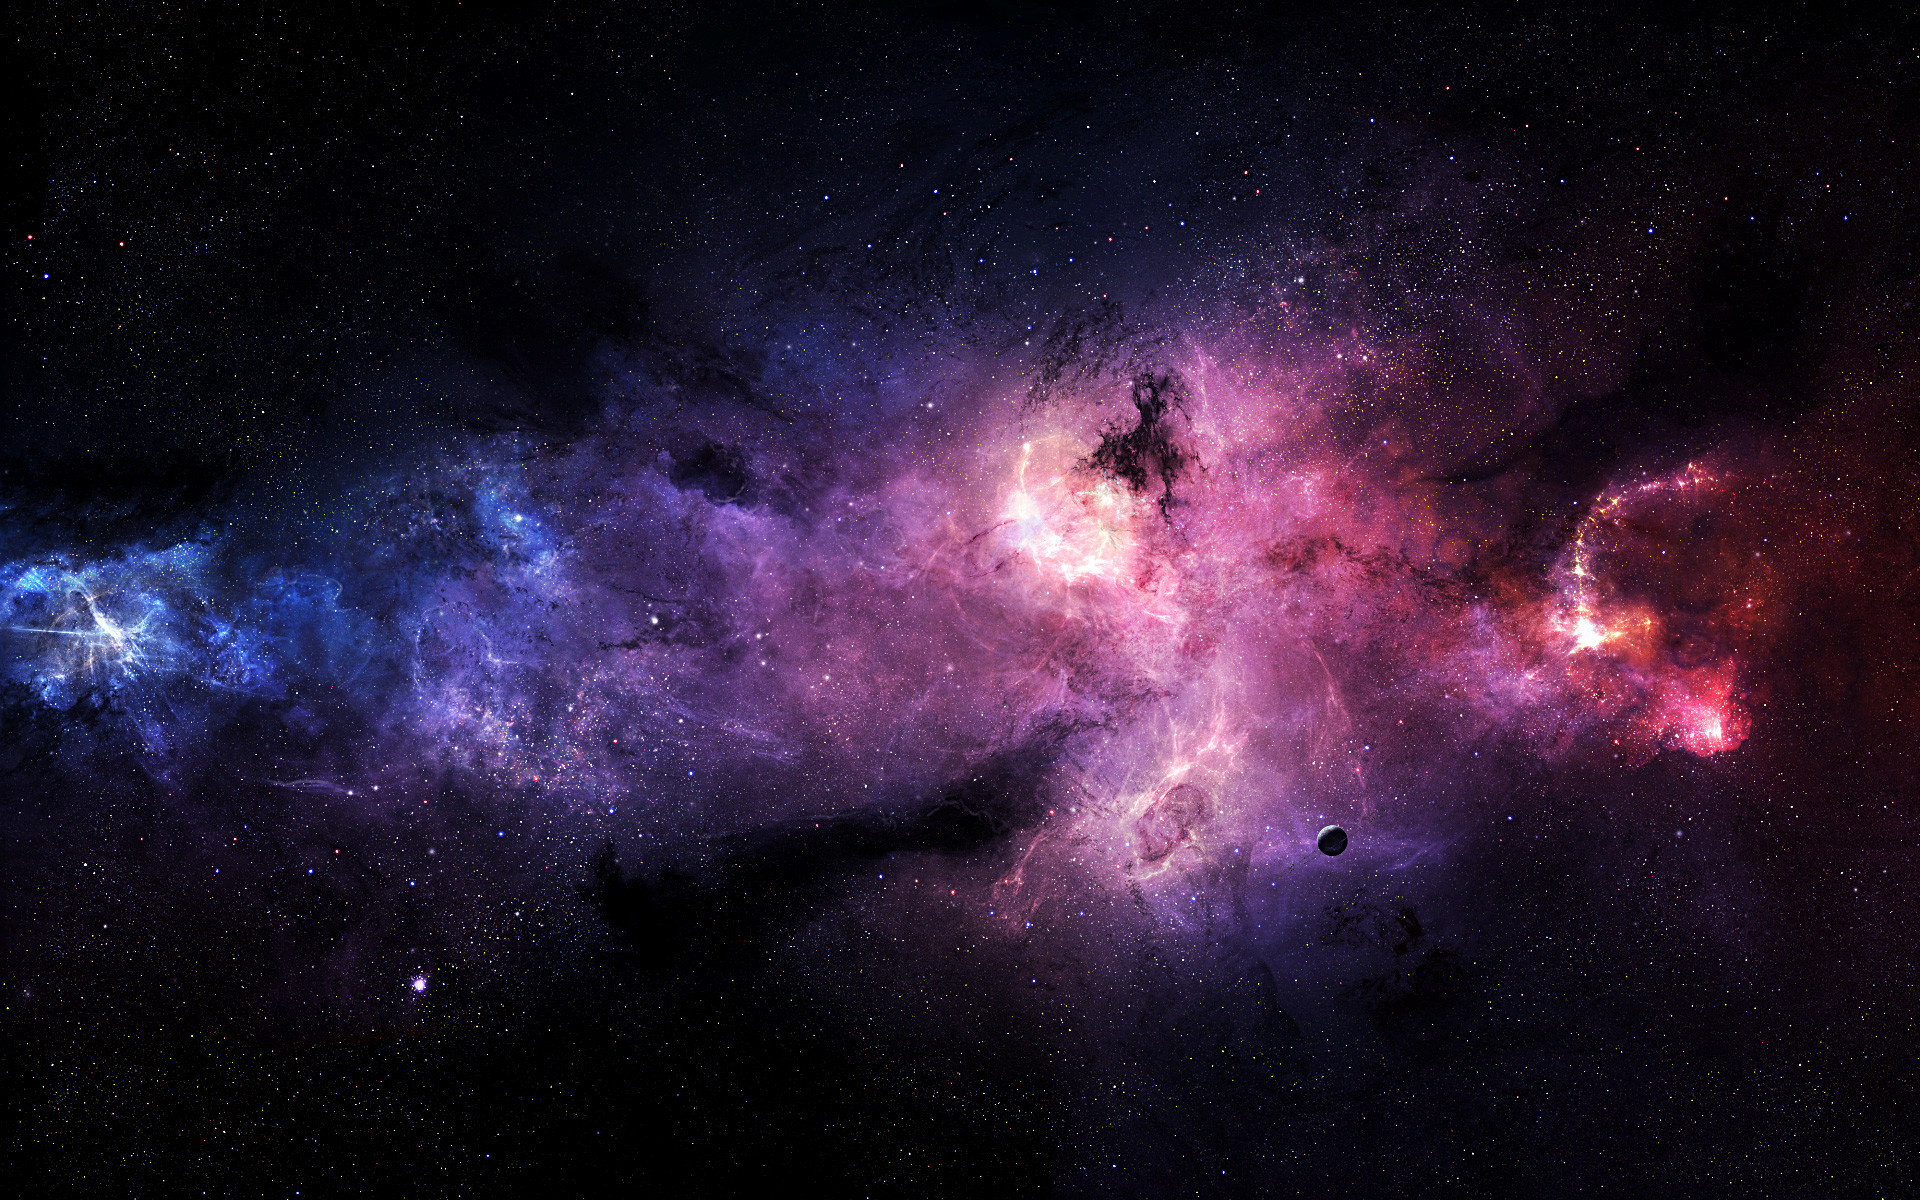 Hipster galaxy wallpaper, Trendy backgrounds, Retro style, Cosmic vibes, 1920x1200 HD Desktop